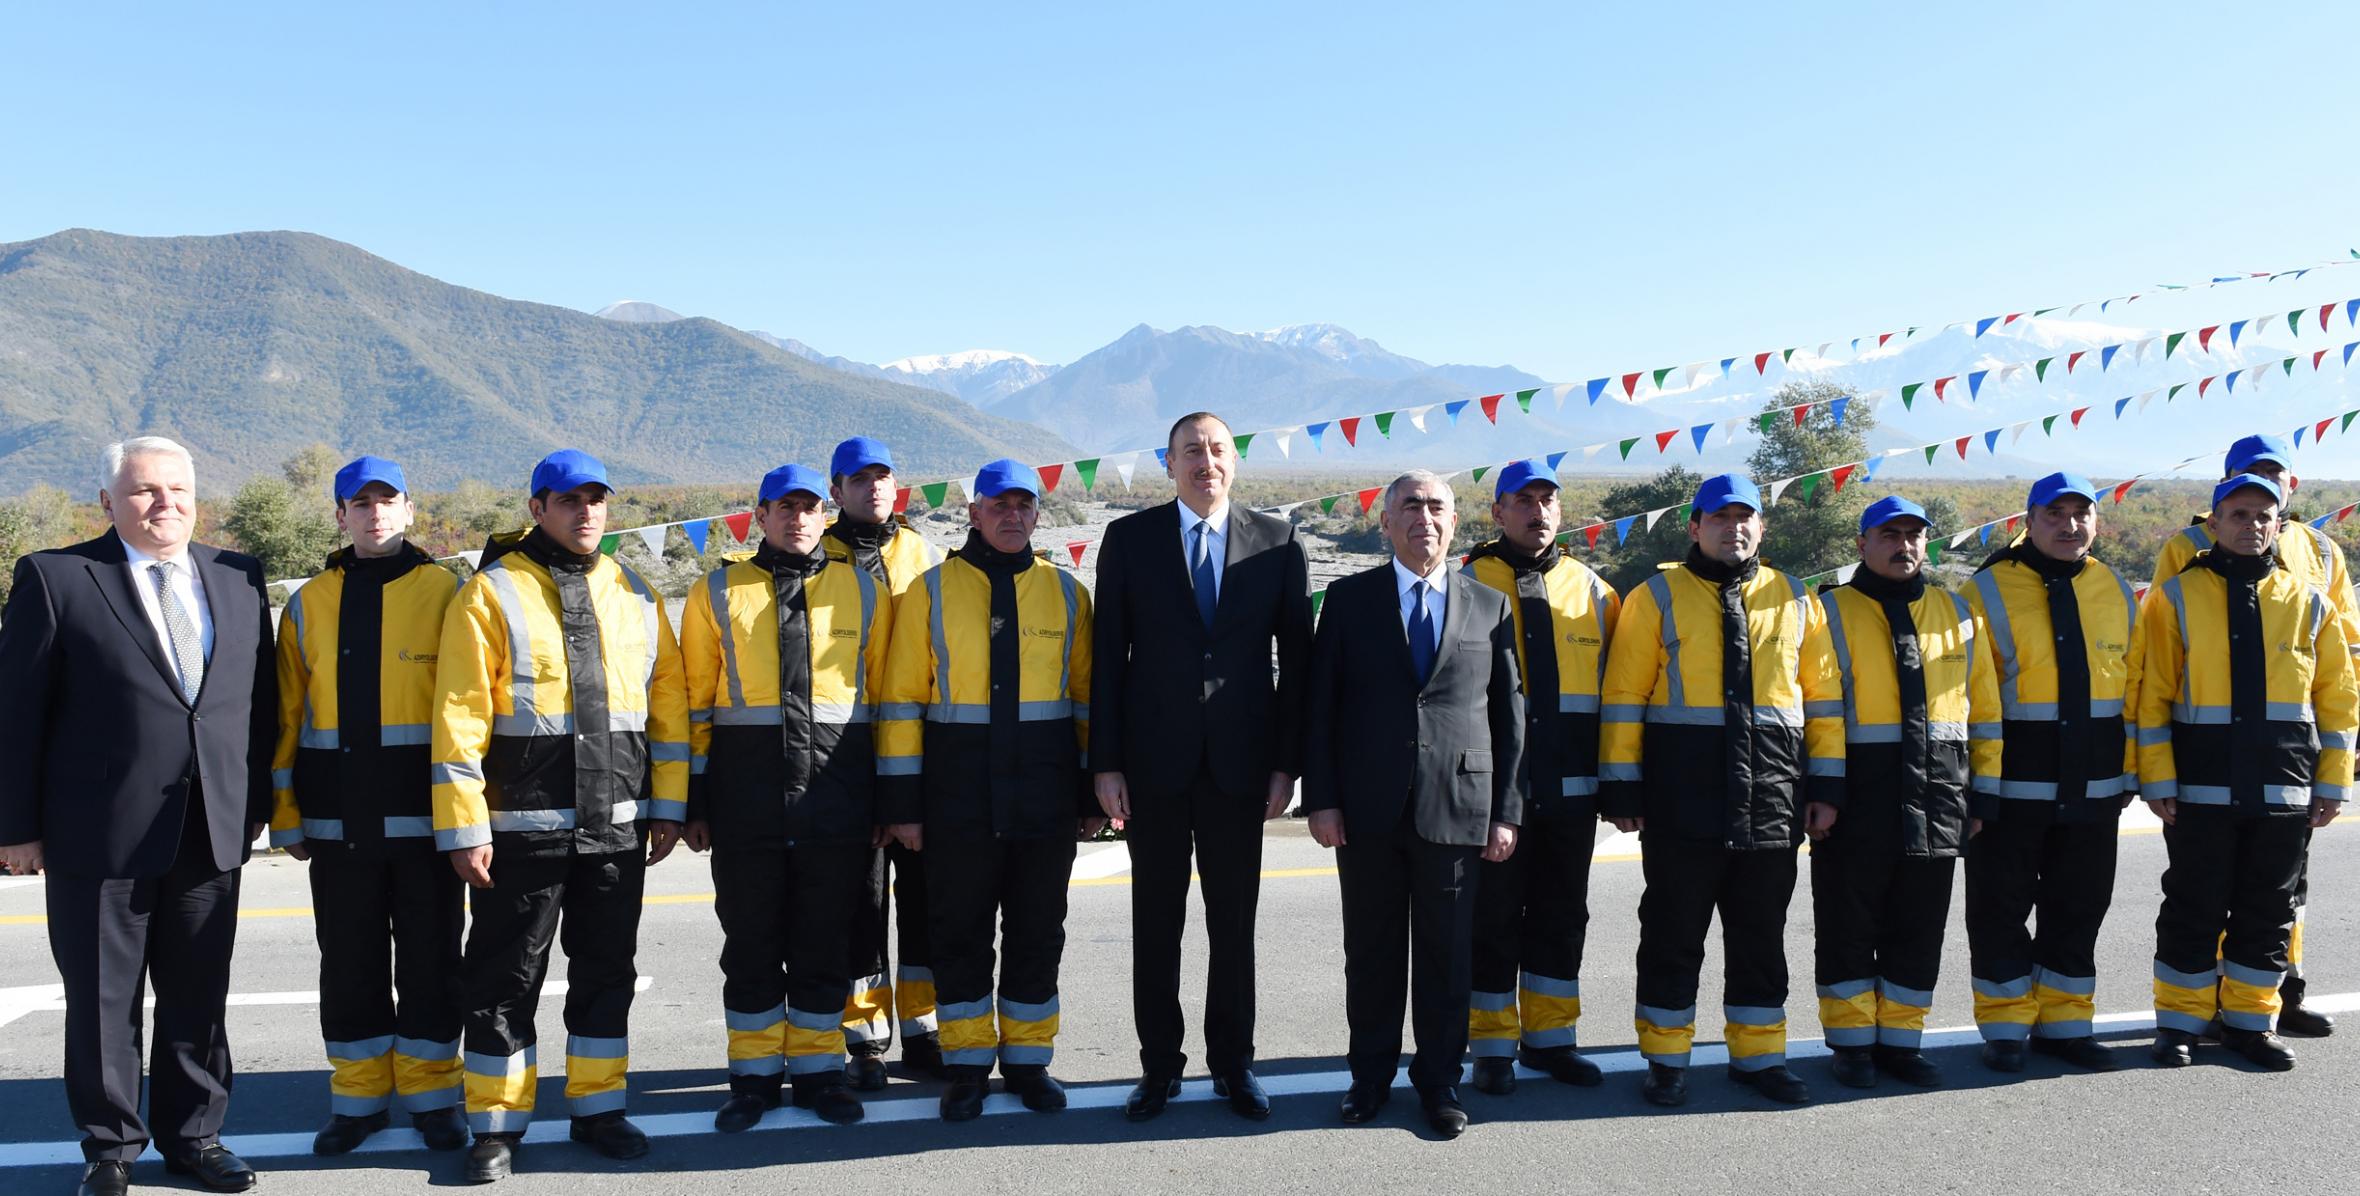 Ilham Aliyev attended the opening of the newly-reconstructed Shaki-Gakh section of the Shaki-Gakh-Zagatala highway